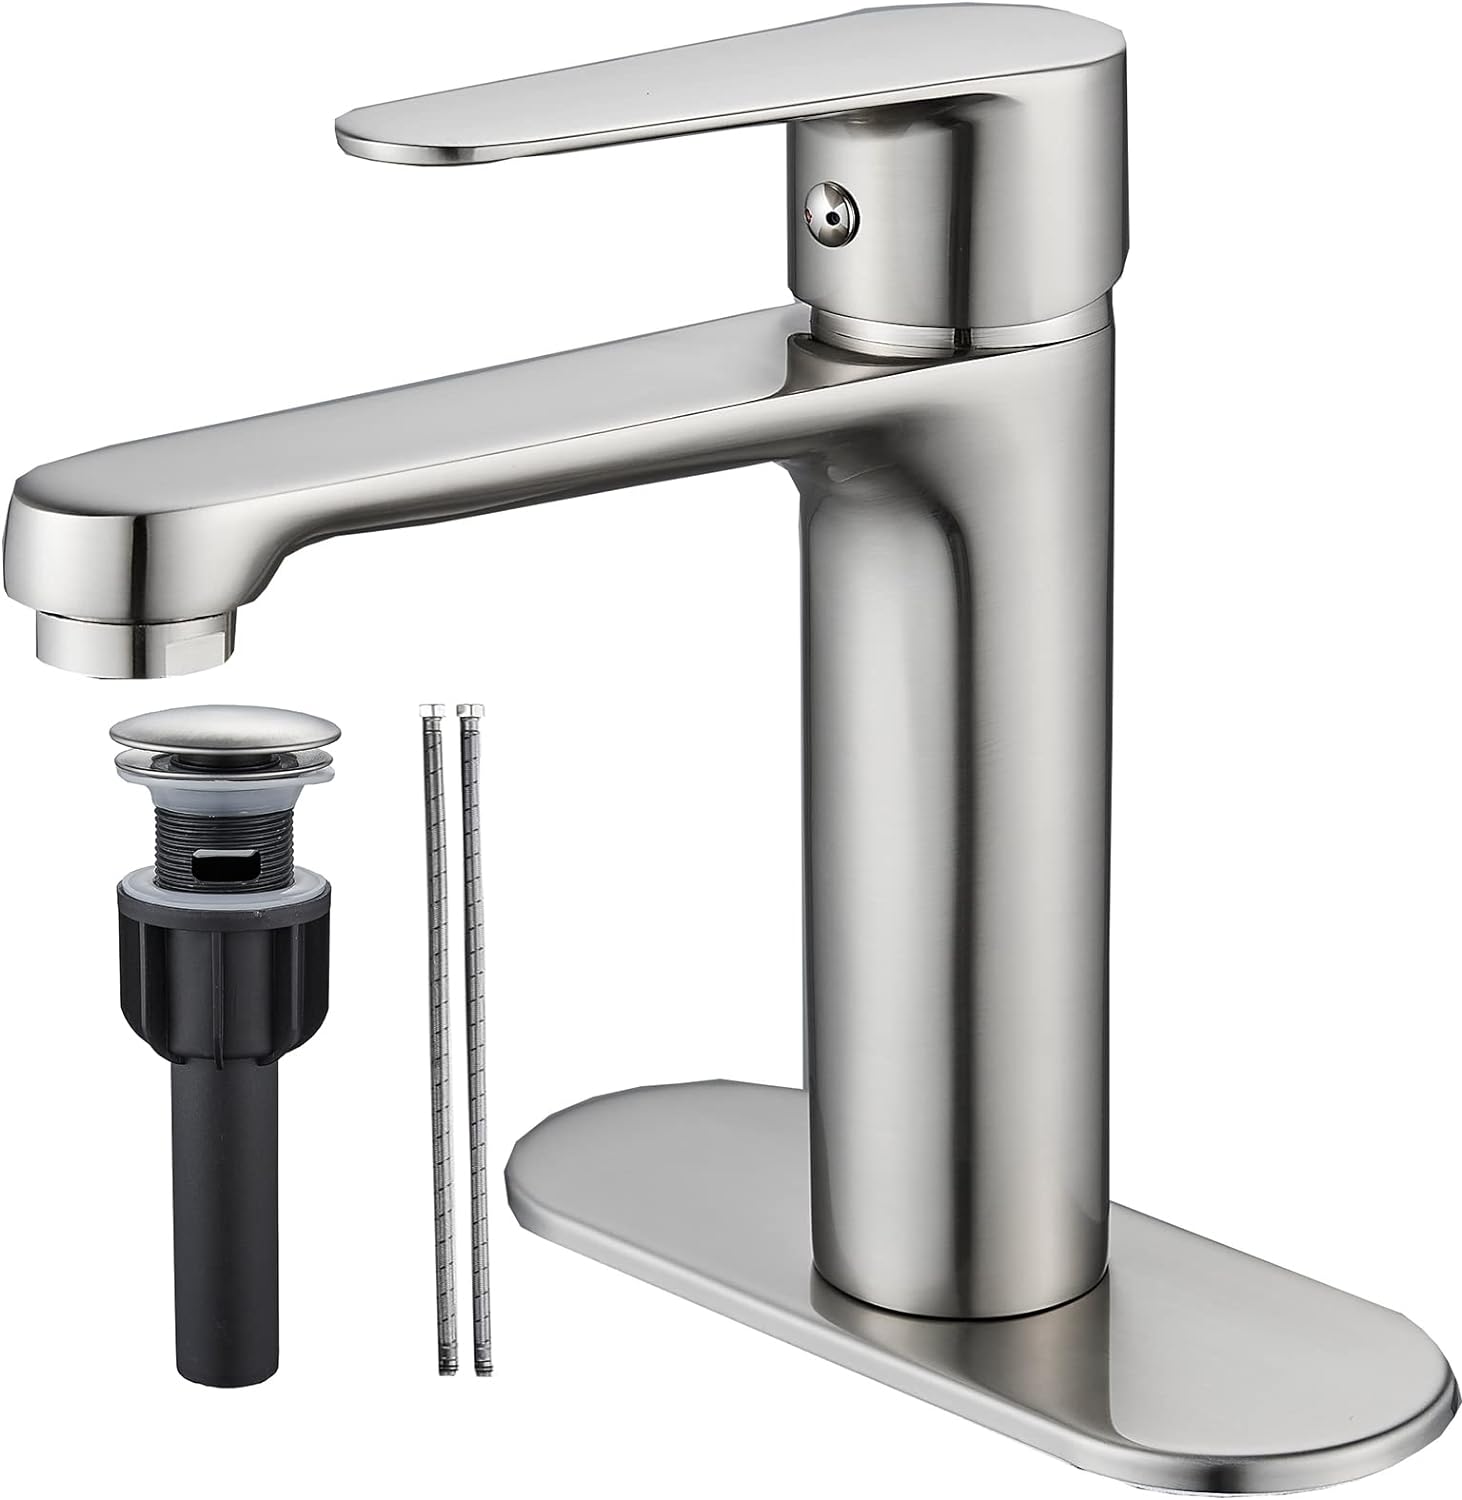 nice faucet, good design (only few parts to install, no need to use plumber' putty, good gaskets), very easy to install (took only few minutes to tight few things), easy to follow instructions, good materials, well made